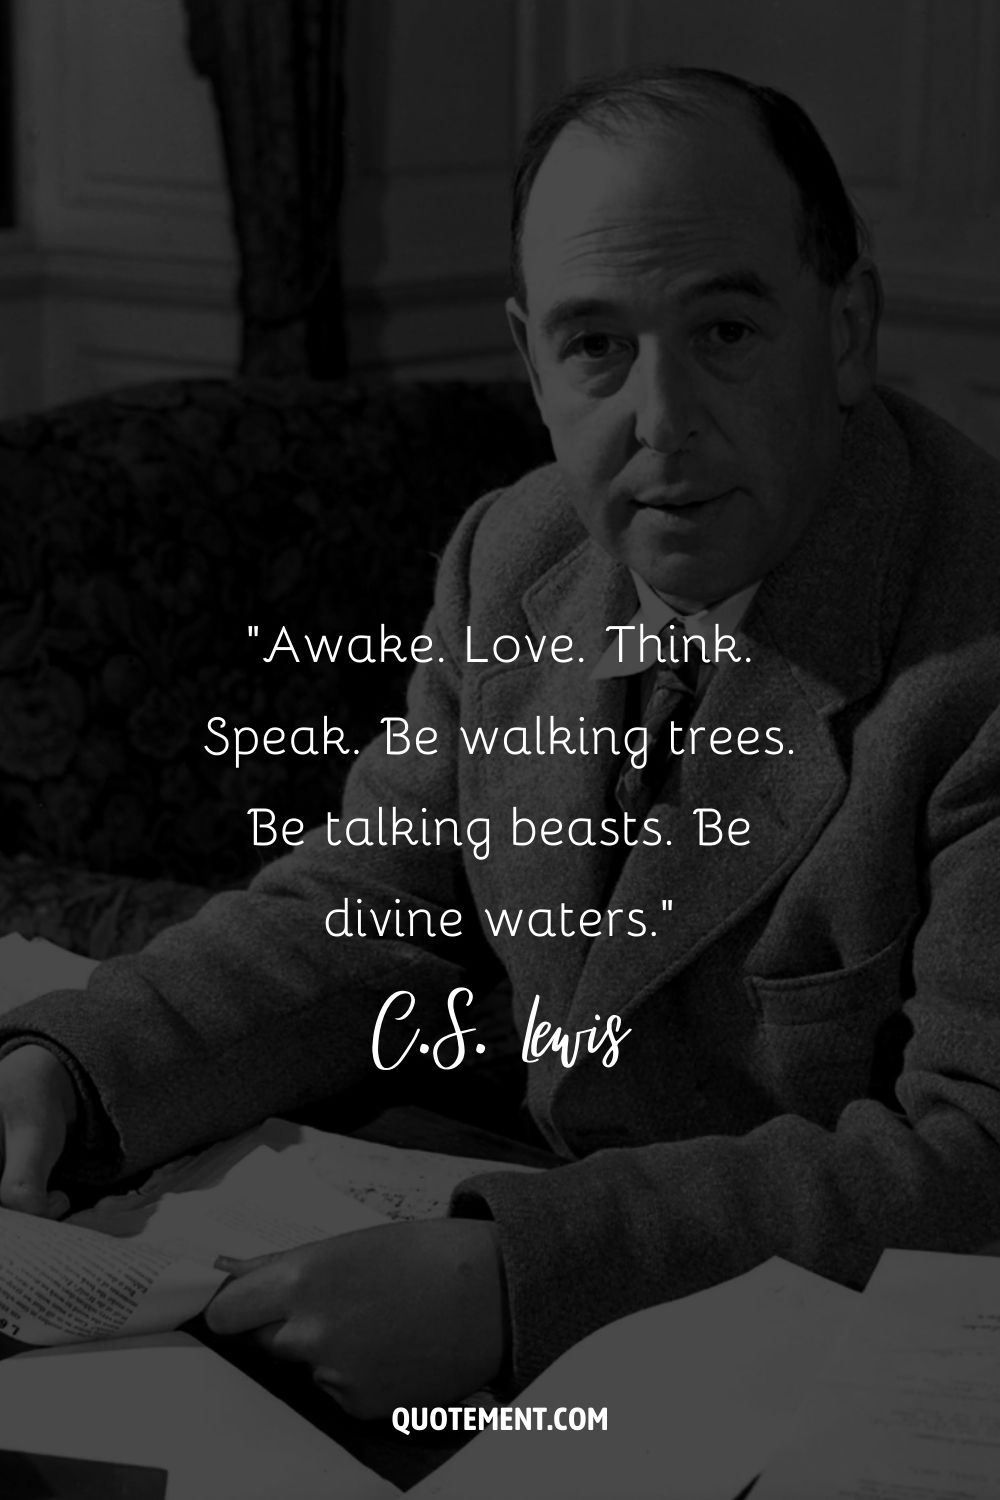 C.S. Lewis holding a script in his hand representing the best C.S. Lewis quote